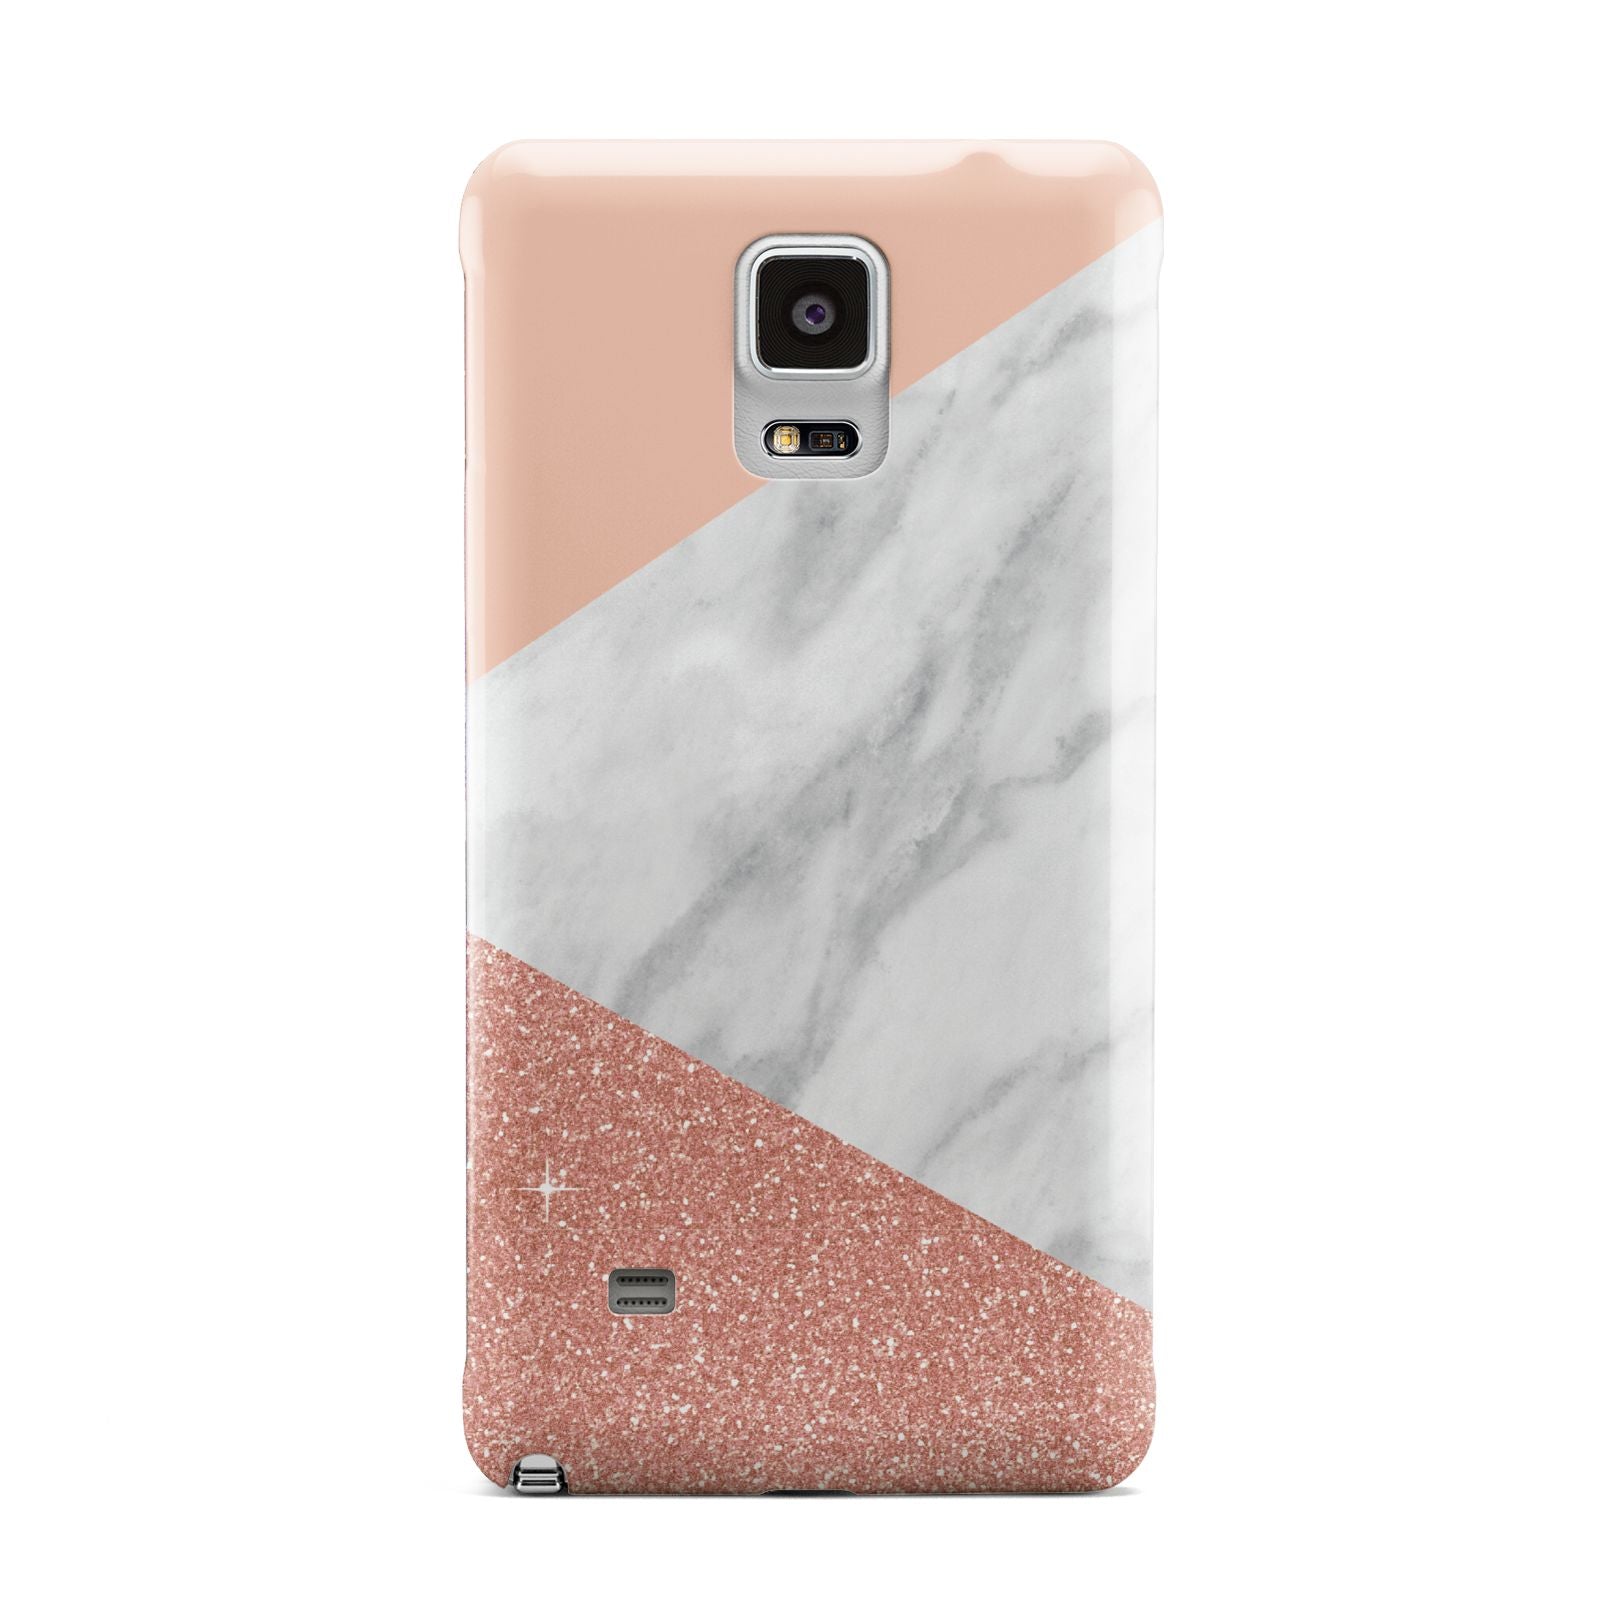 Marble White Rose Gold Samsung Galaxy Note 4 Case